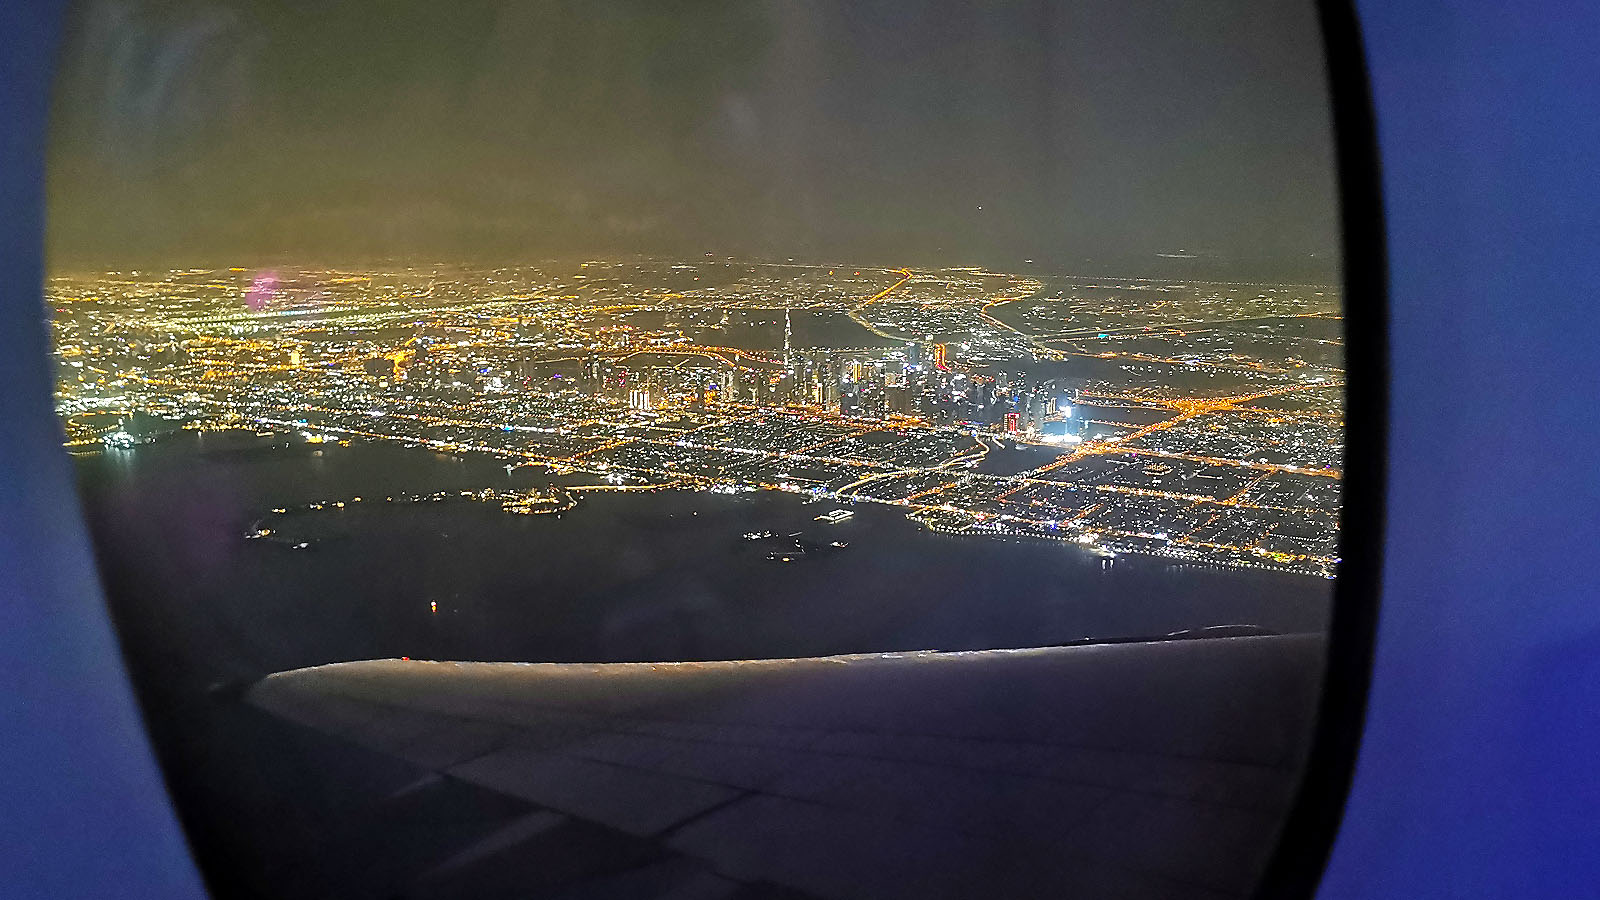 Dubai skyline, as seeon from Emirates Airbus A380 Business Class